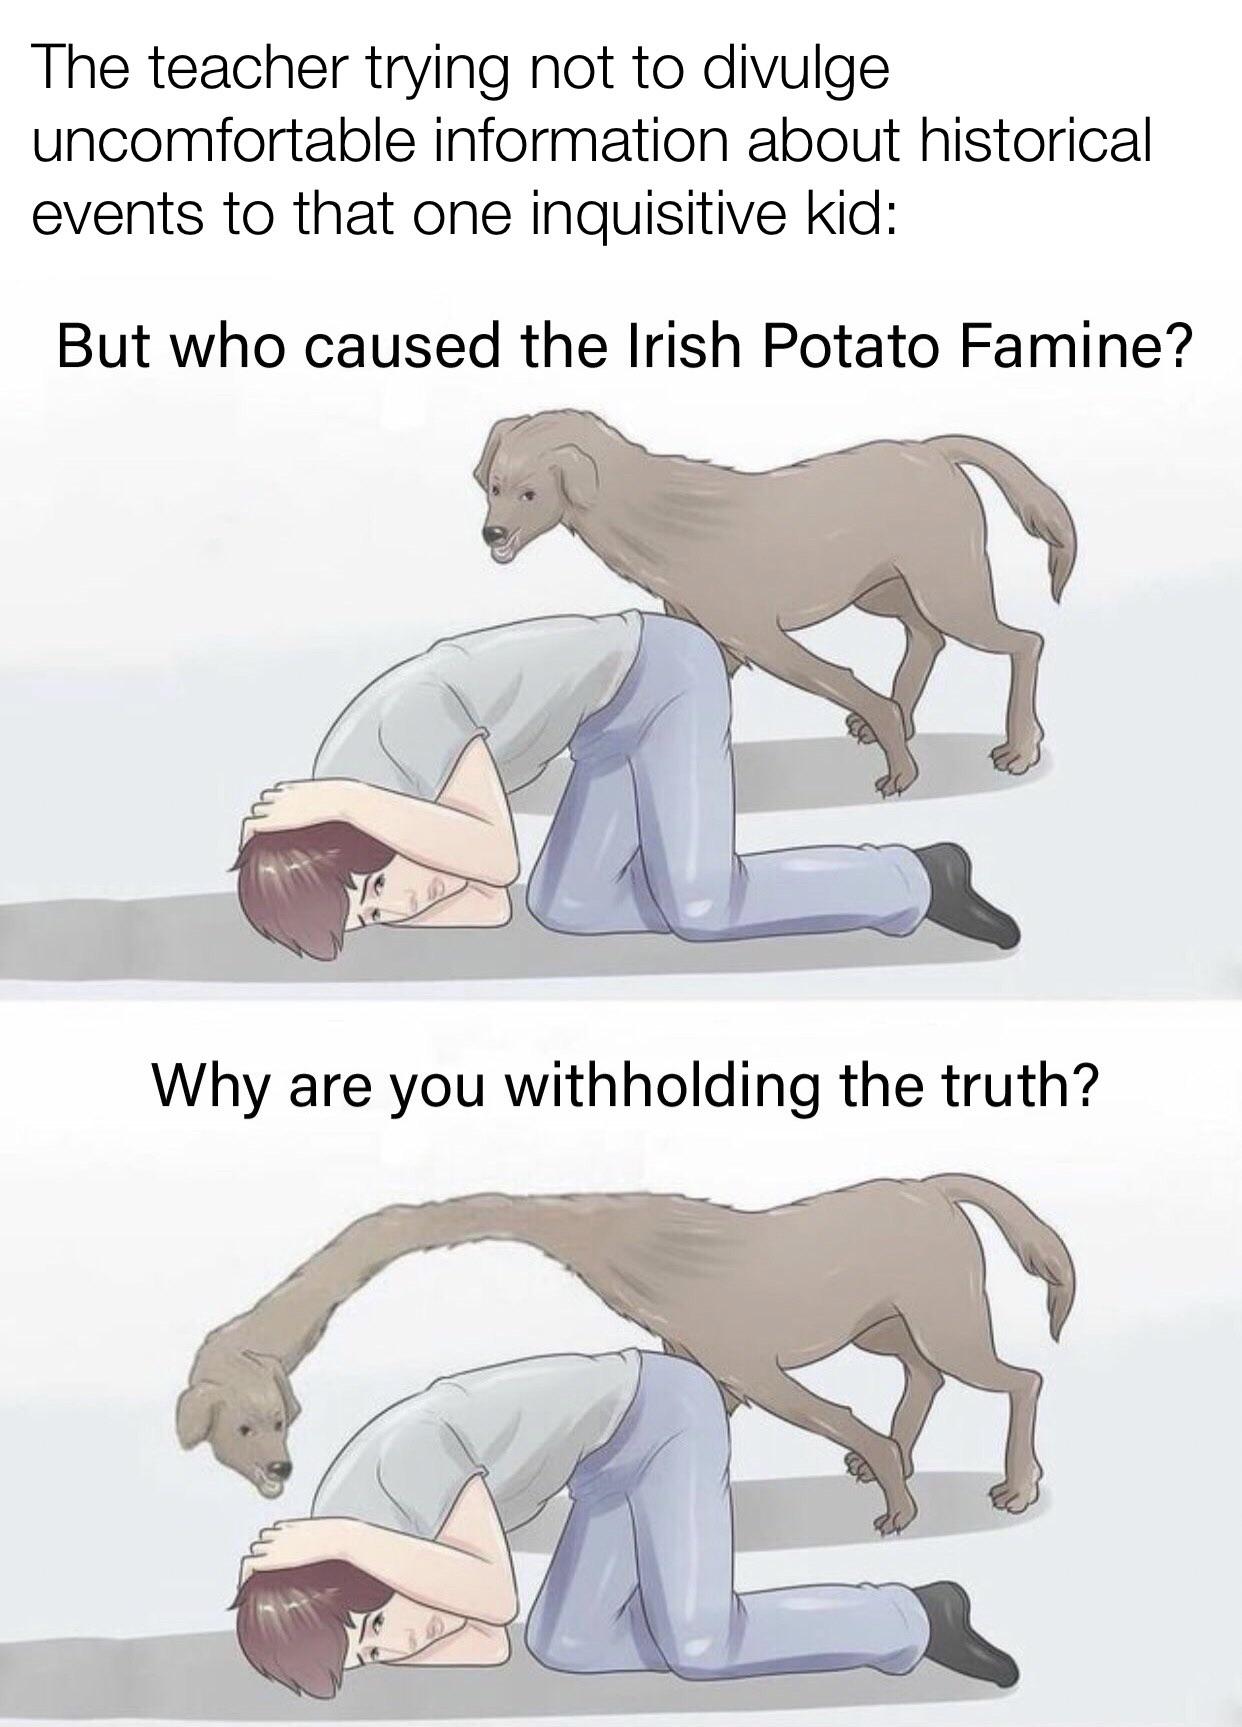 funny memes and pics - long neck wikihow dog - The teacher trying not to divulge uncomfortable information about historical events to that one inquisitive kid But who caused the Irish Potato Famine? Why are you withholding the truth?